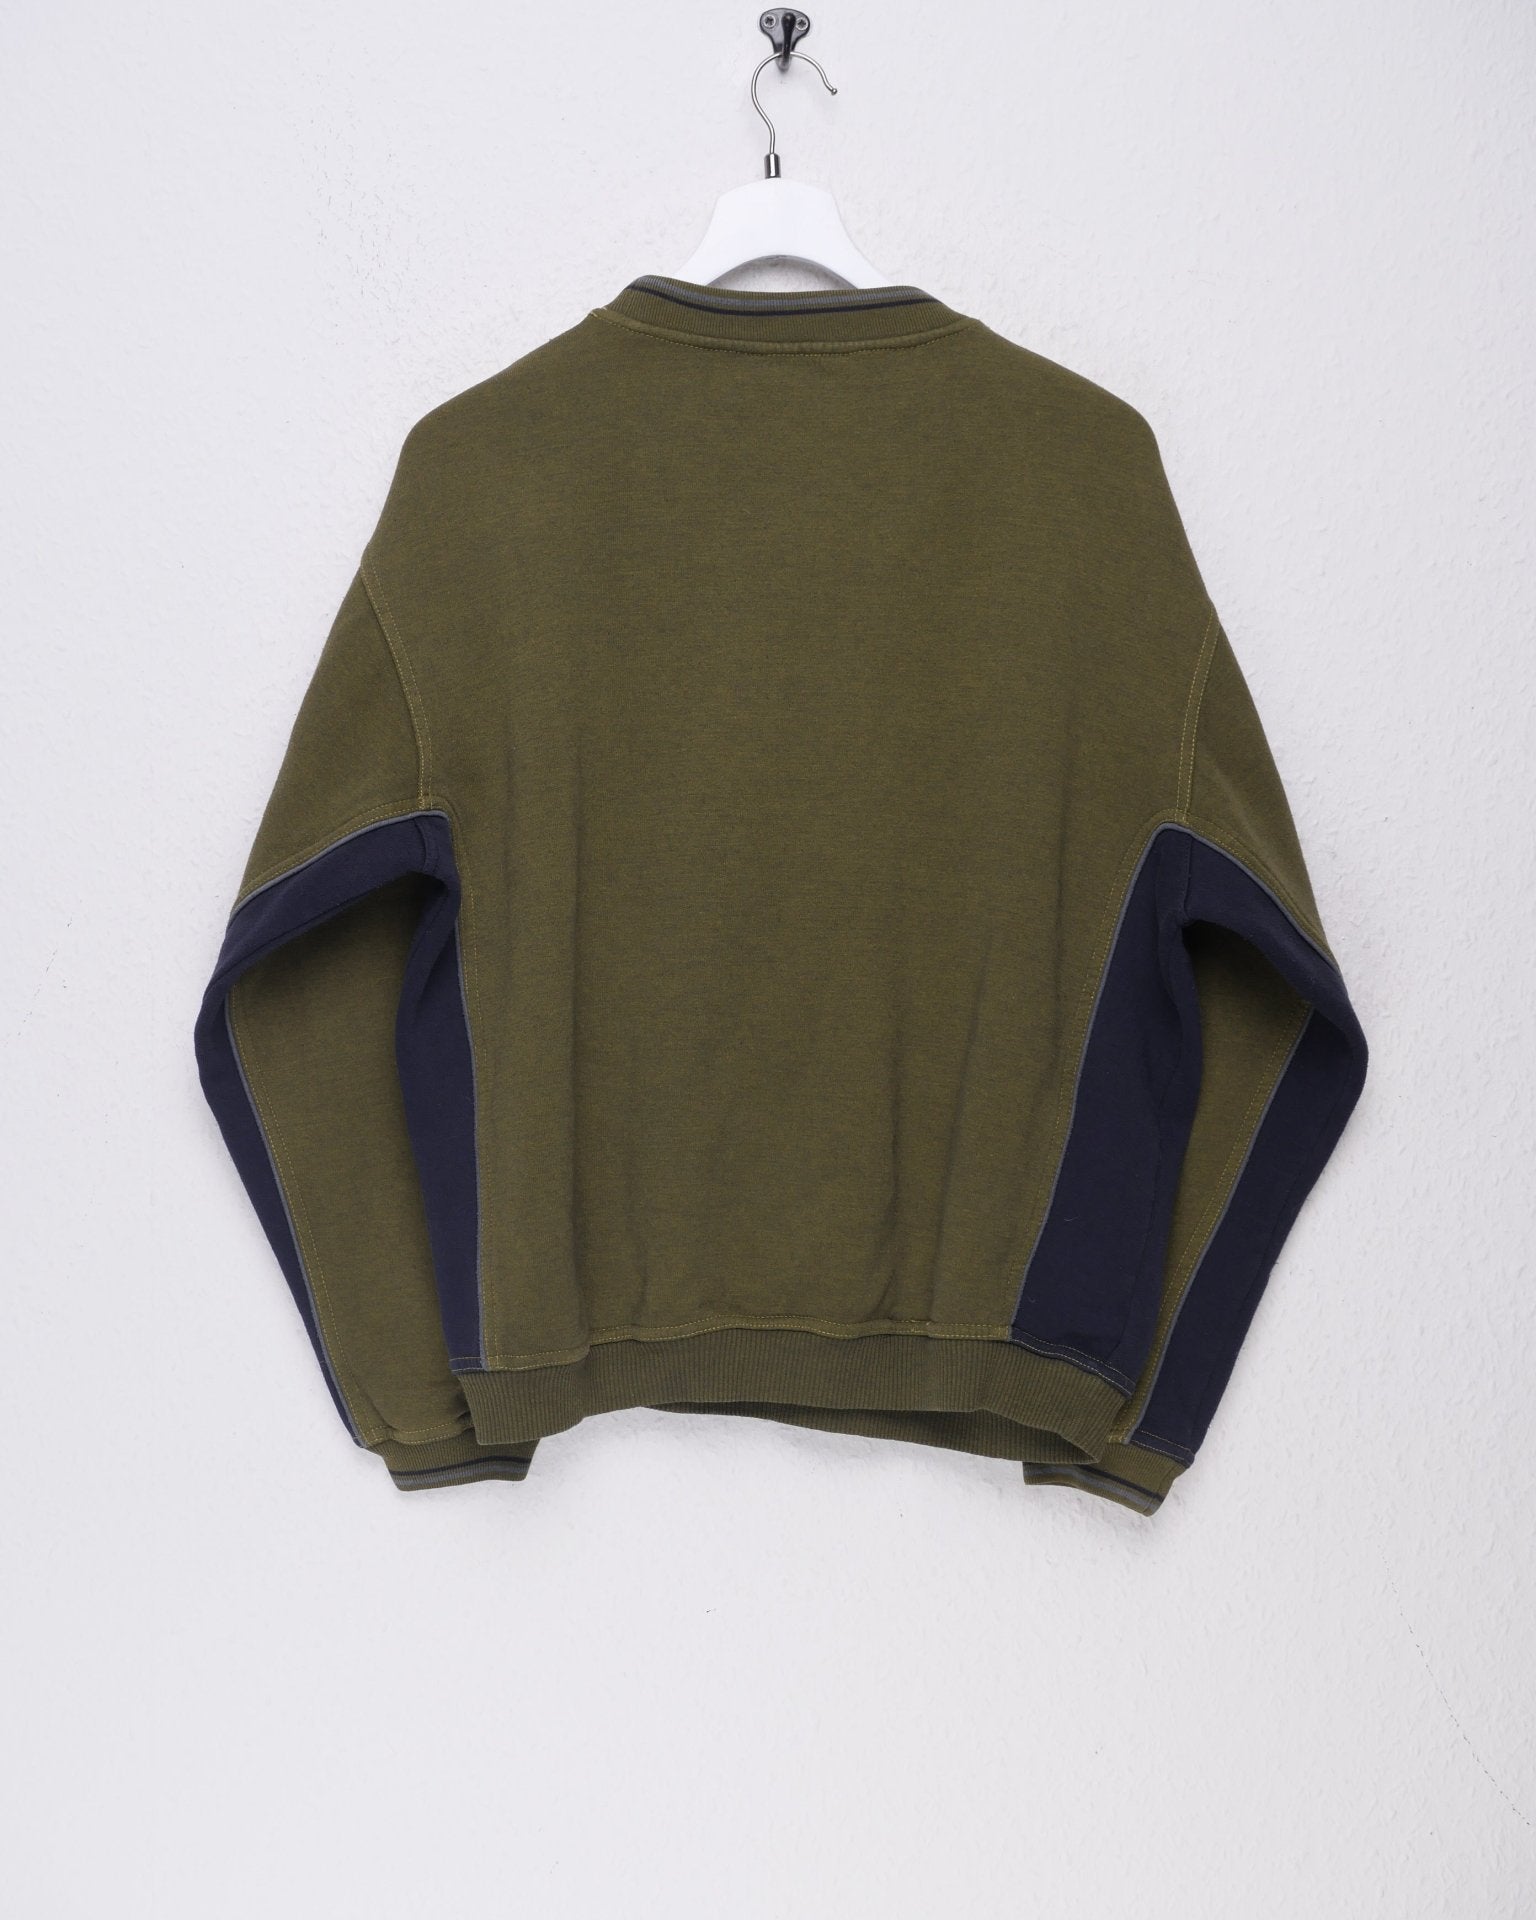 Saucony embroidered Spellout green Sweater - Peeces